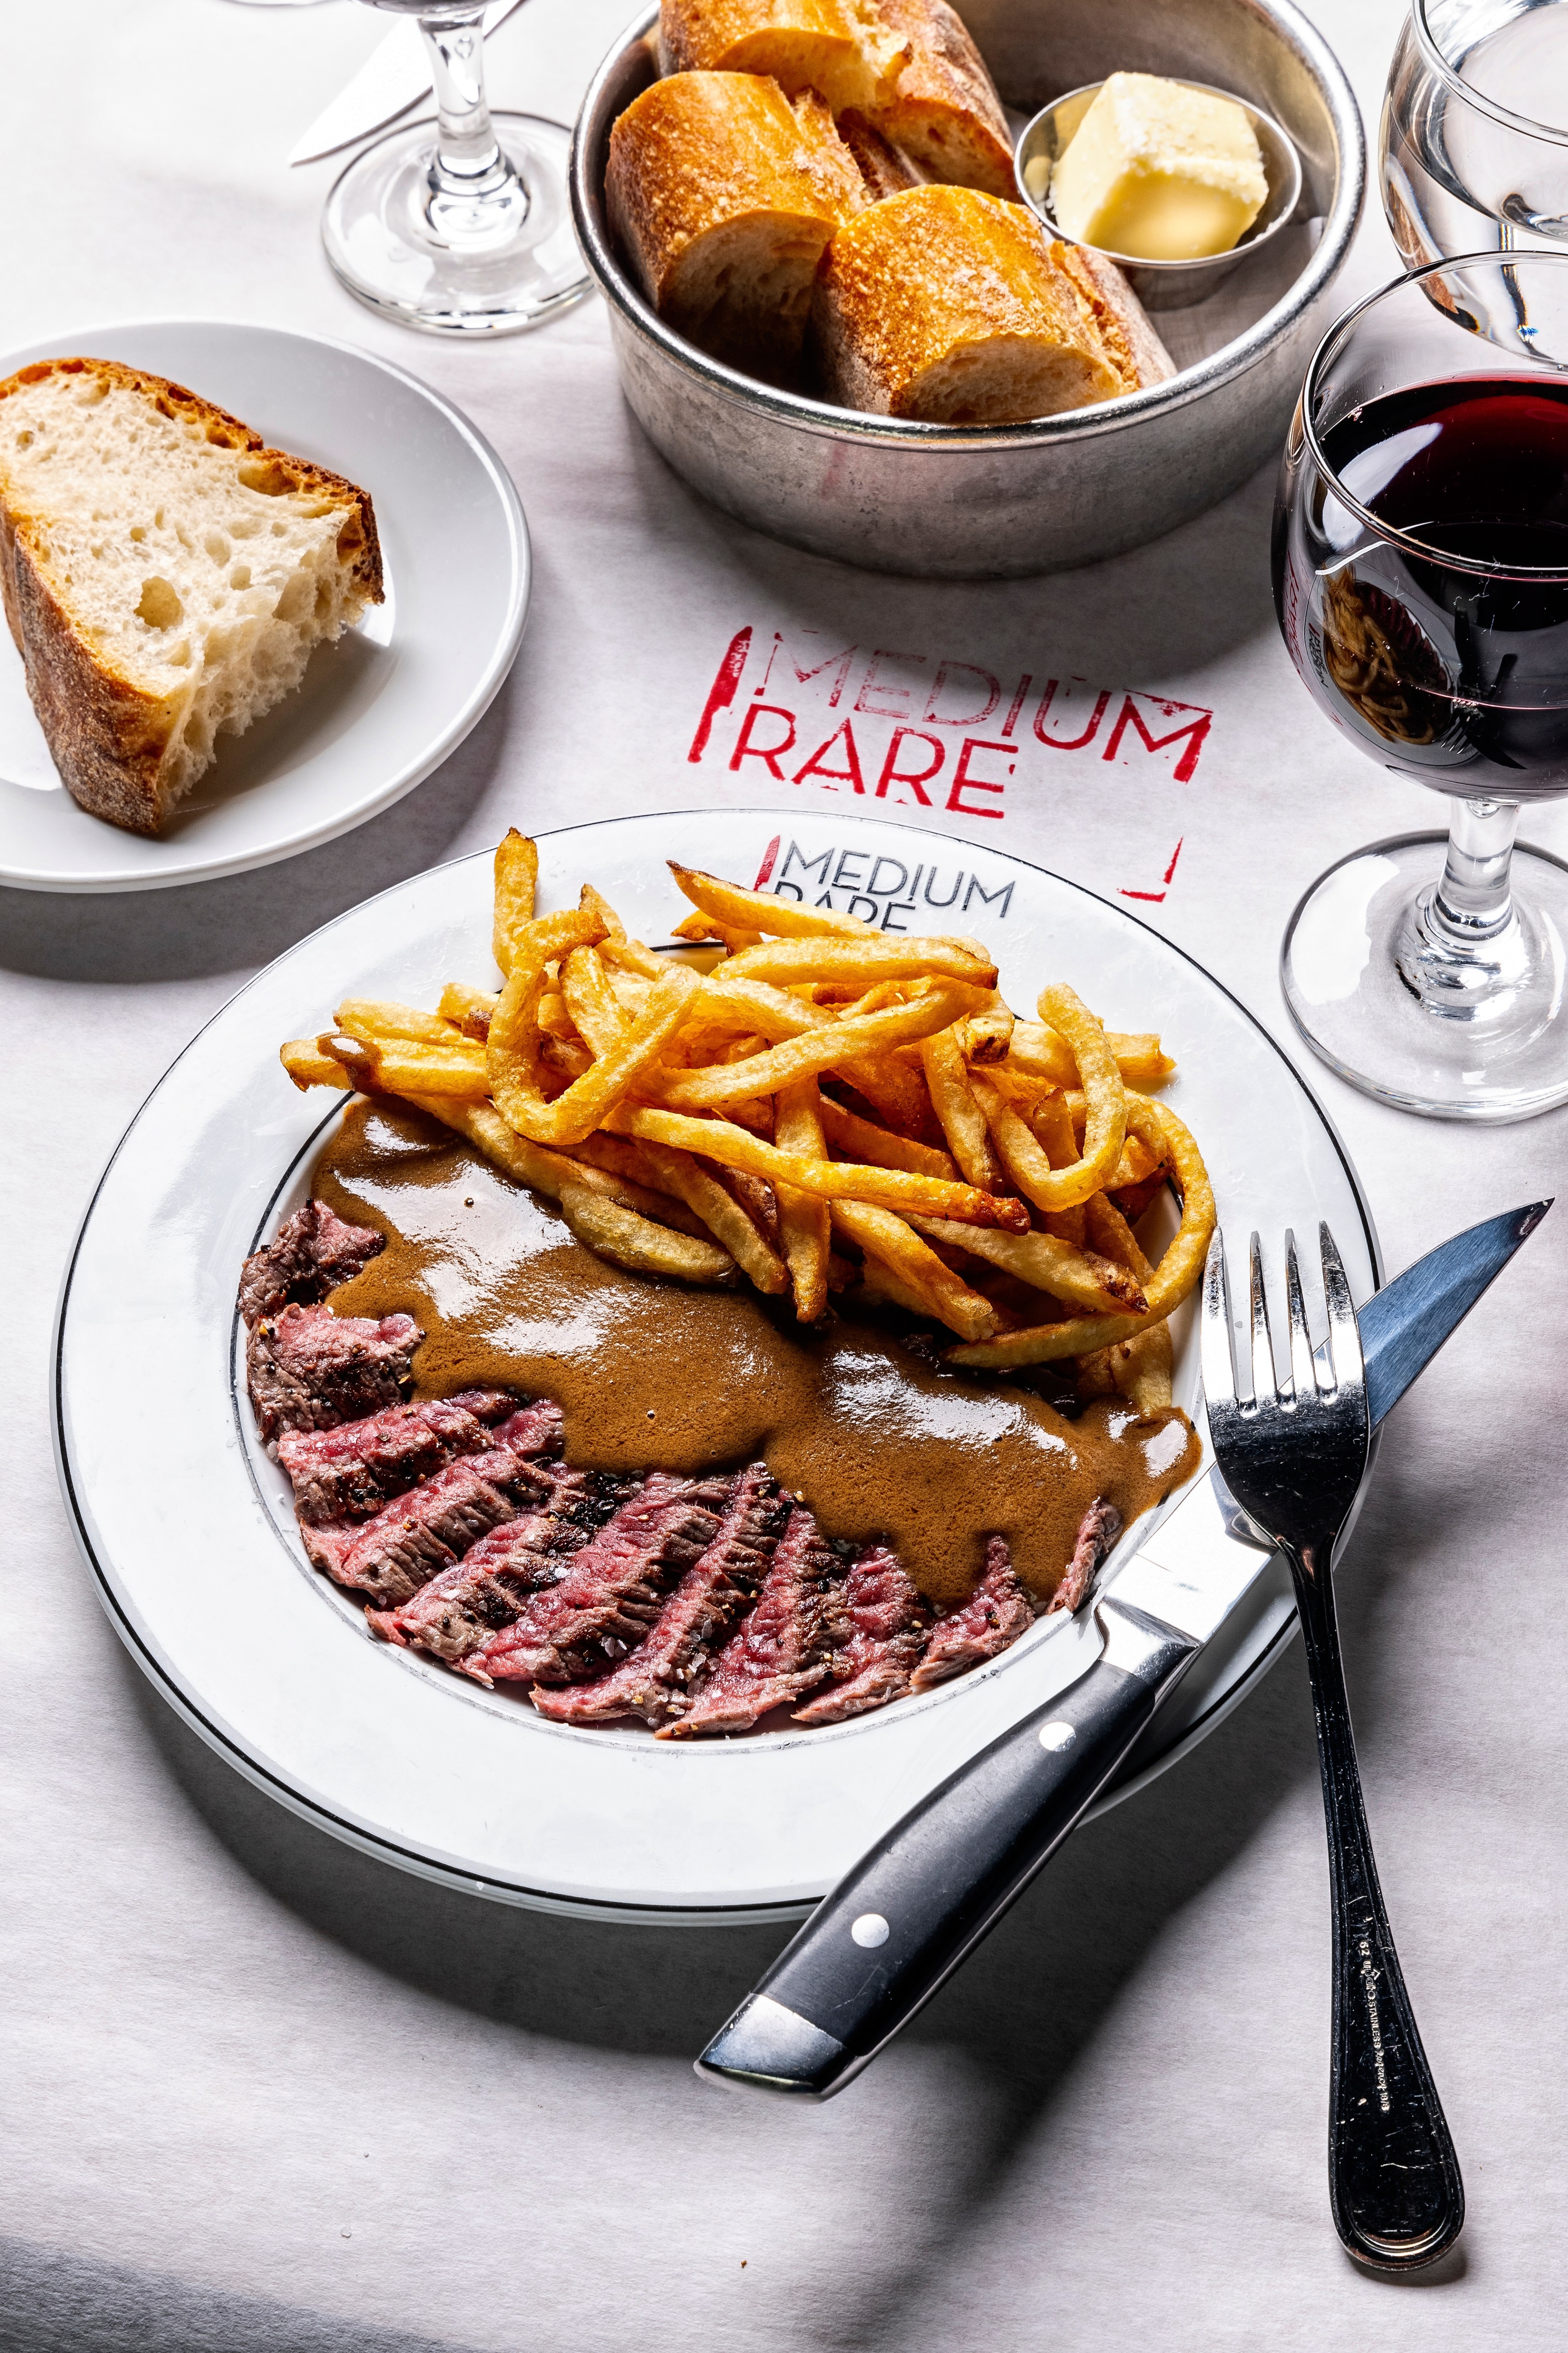 Two plates hold a large thick cut slice of fresh bread and steak, fries and sauce, joined by a glass of red wine and a metal bowl with more bread and butter in a smaller metal bowl, atop a white tablecloth.